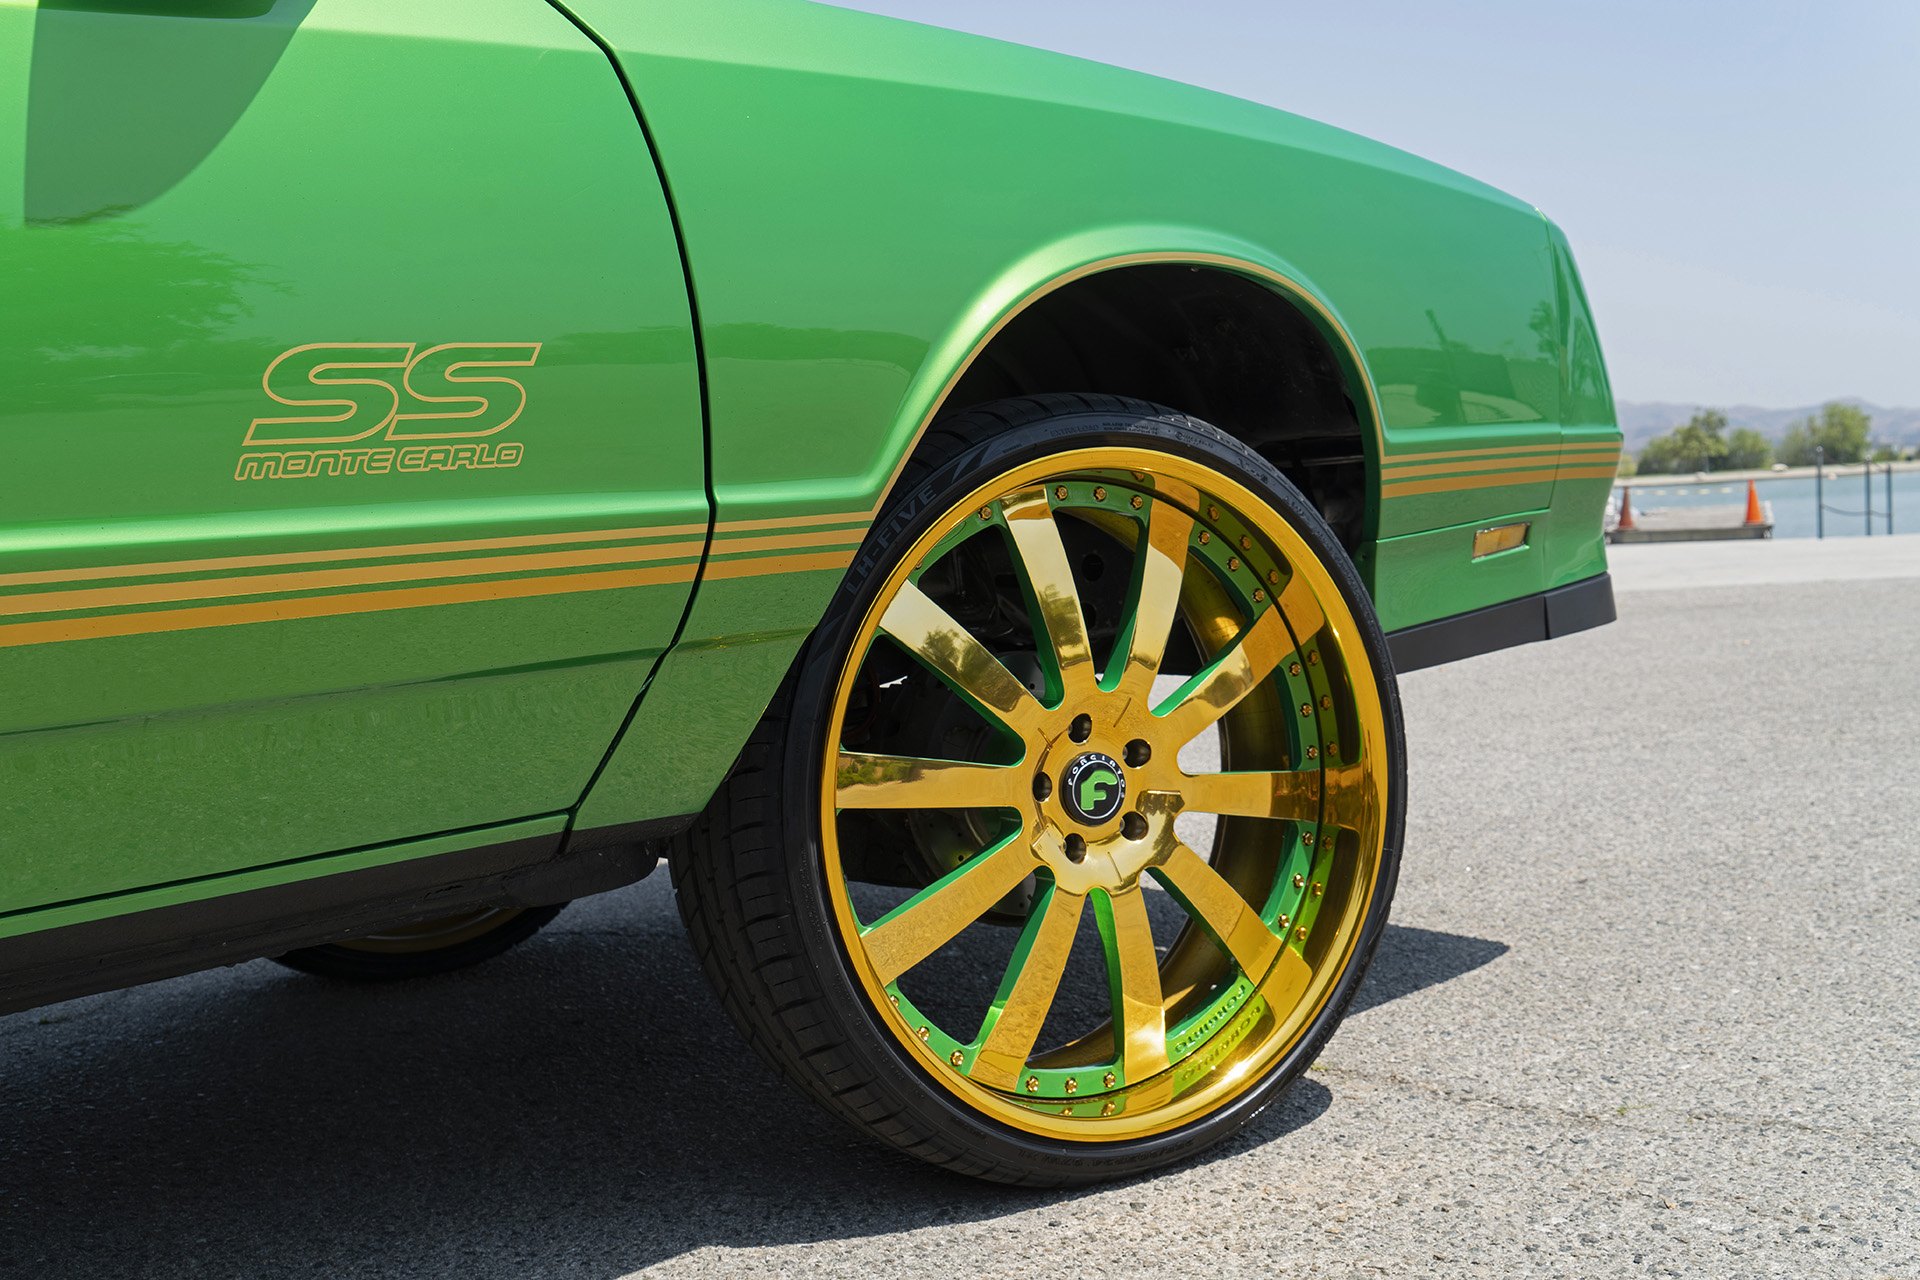 Green Chevy Monte Carlo on Lionhart Tires - Photo by Forgiato